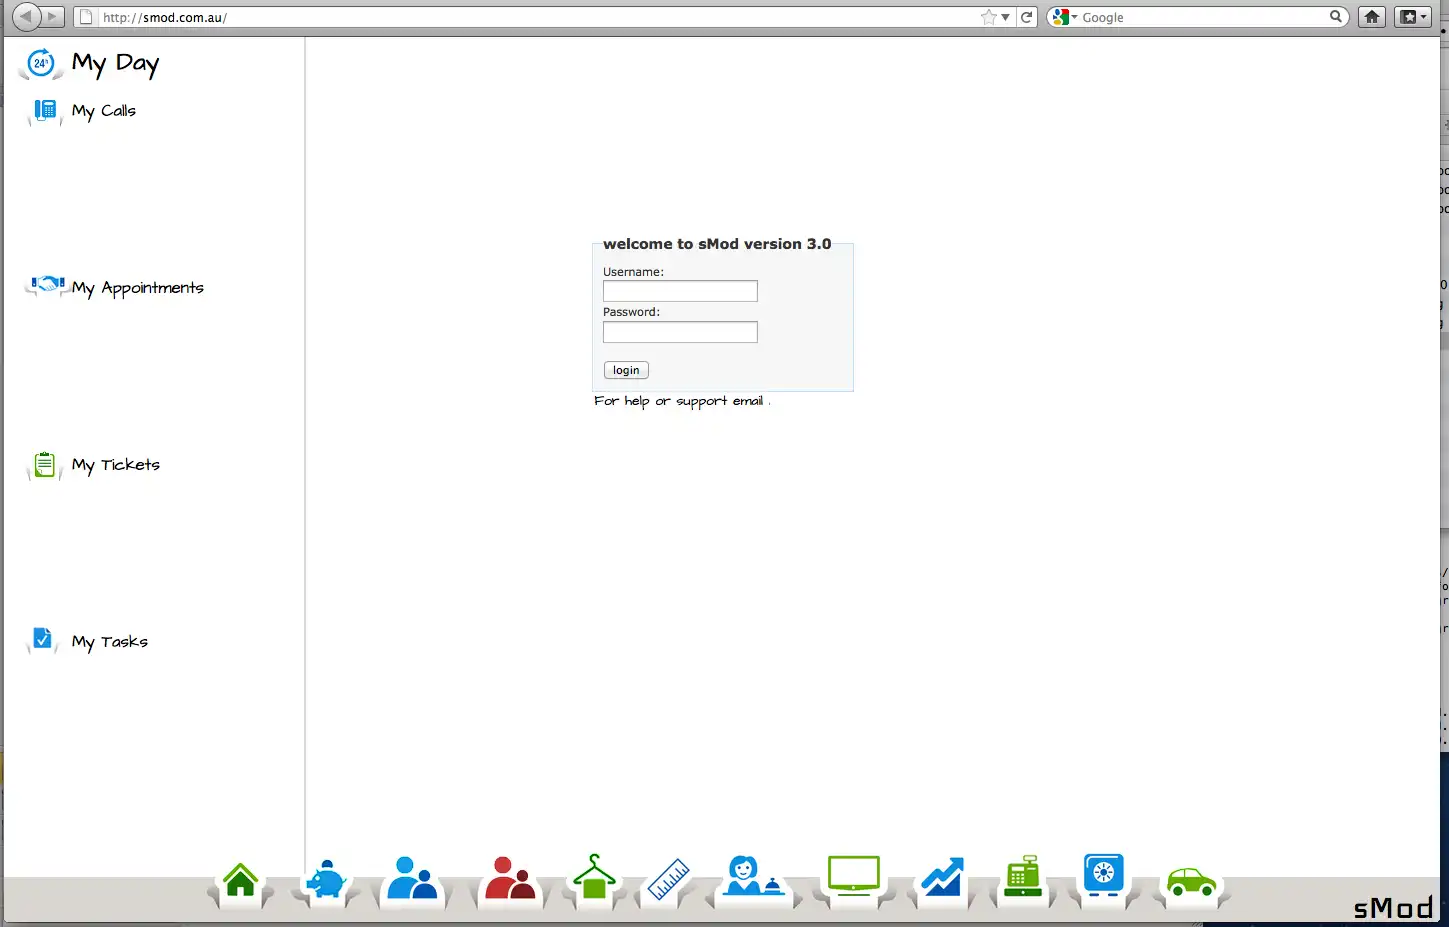 Download web tool or web app opensMod